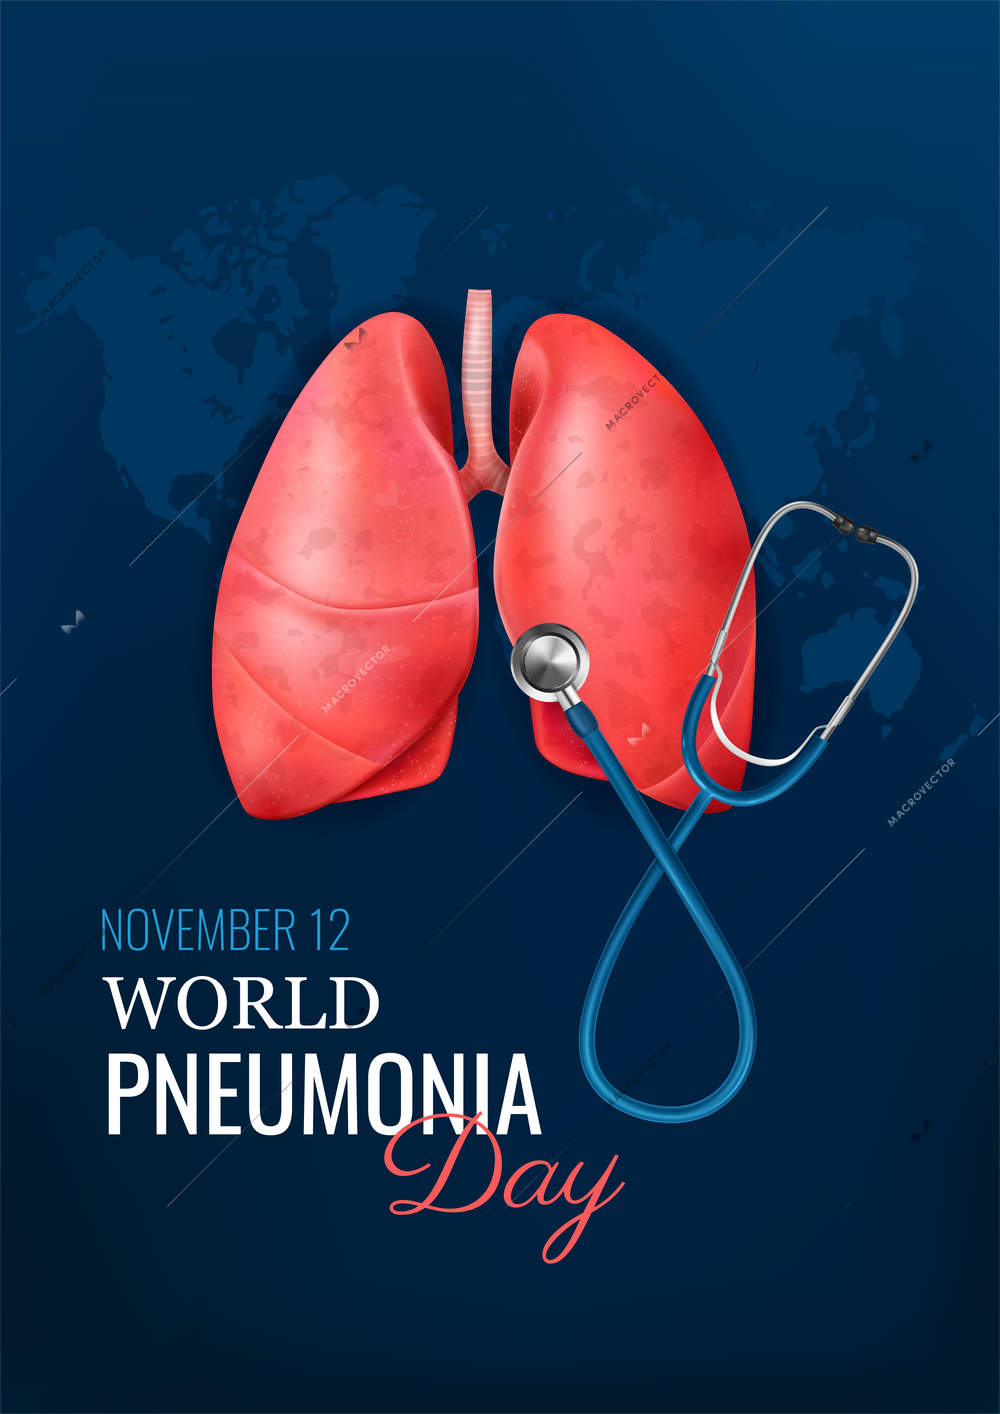 Pneumonia day realistic concept with healthy lung symbols vector illustration